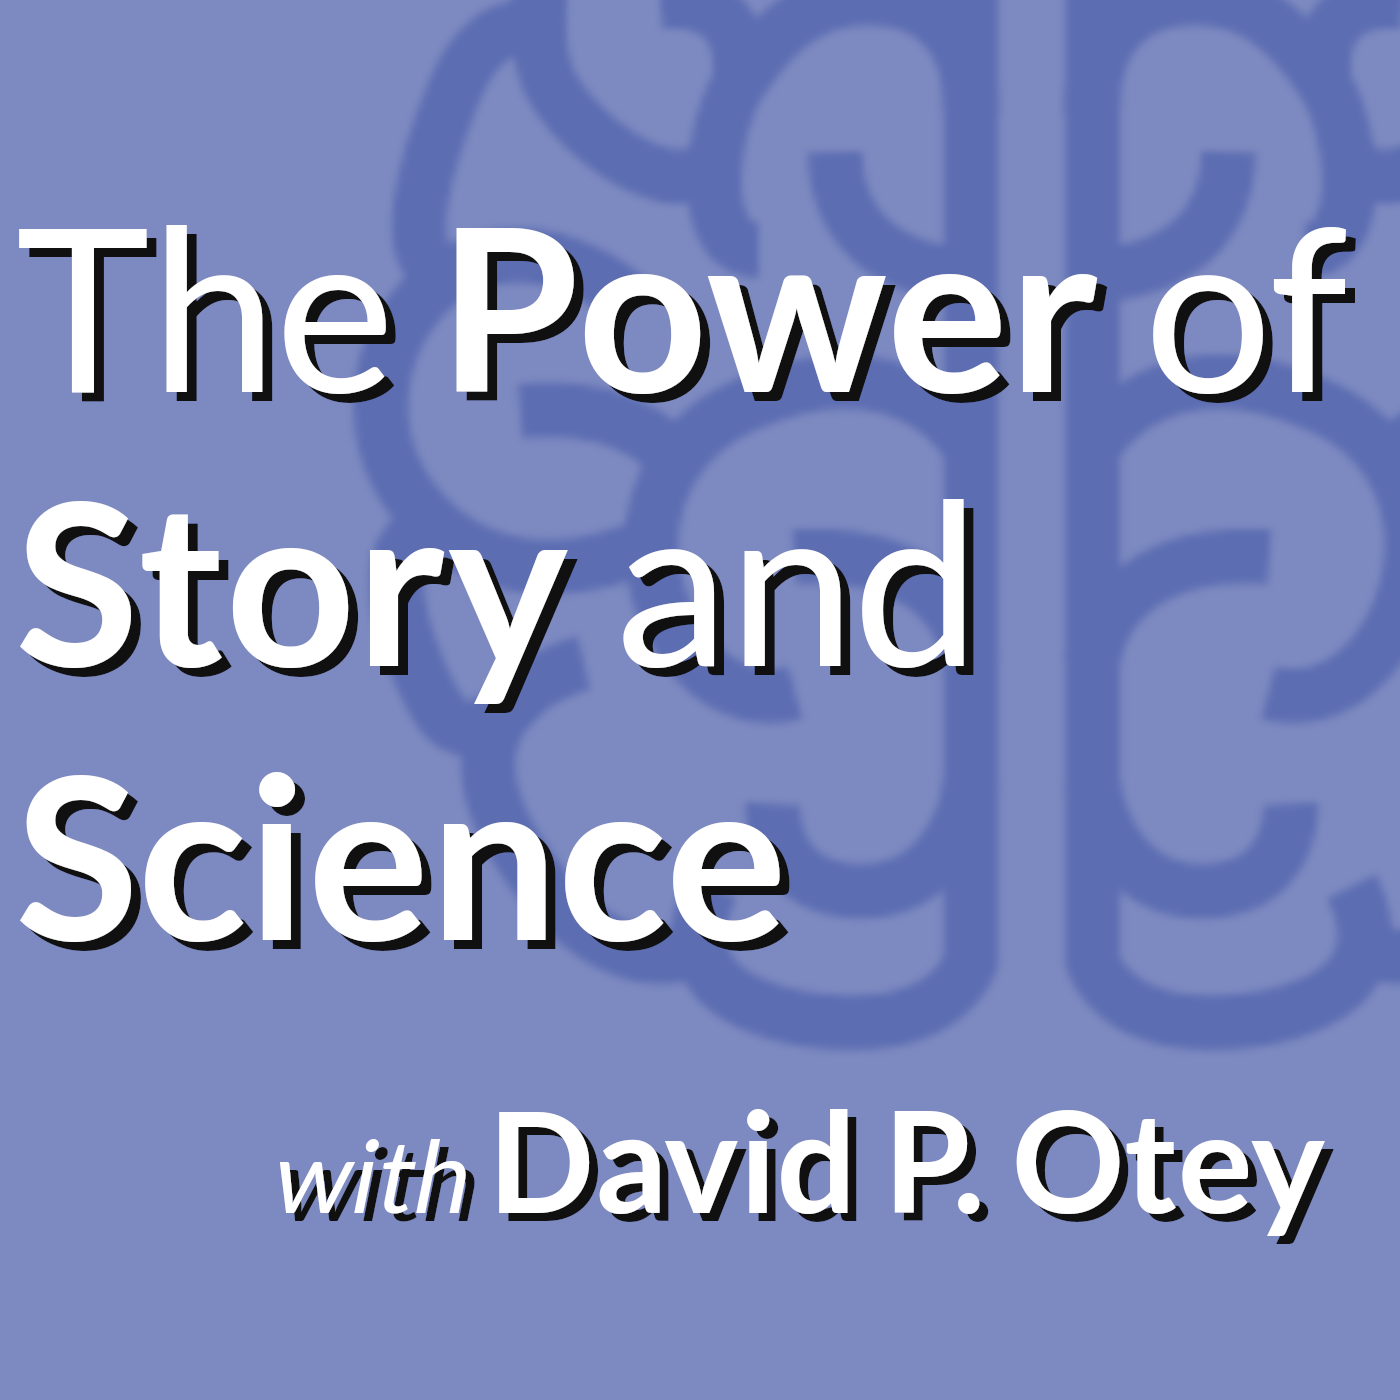 The Power of Story and Science